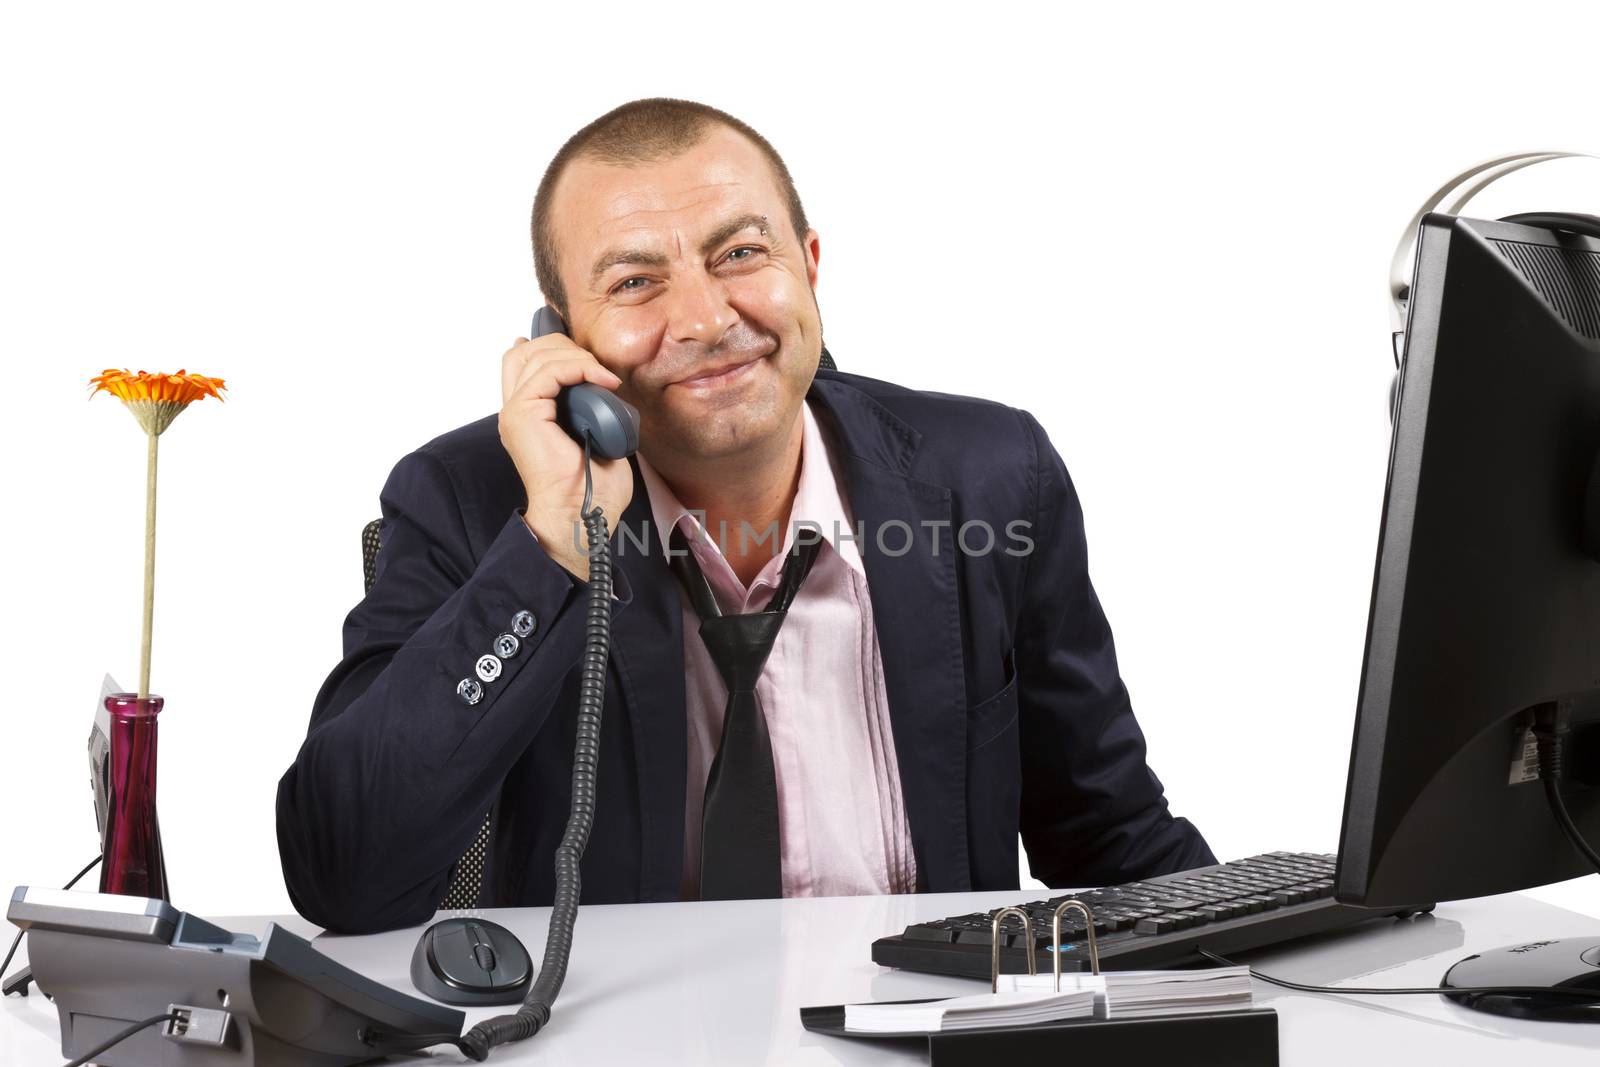 Businessman smiling with a phone. Over white.